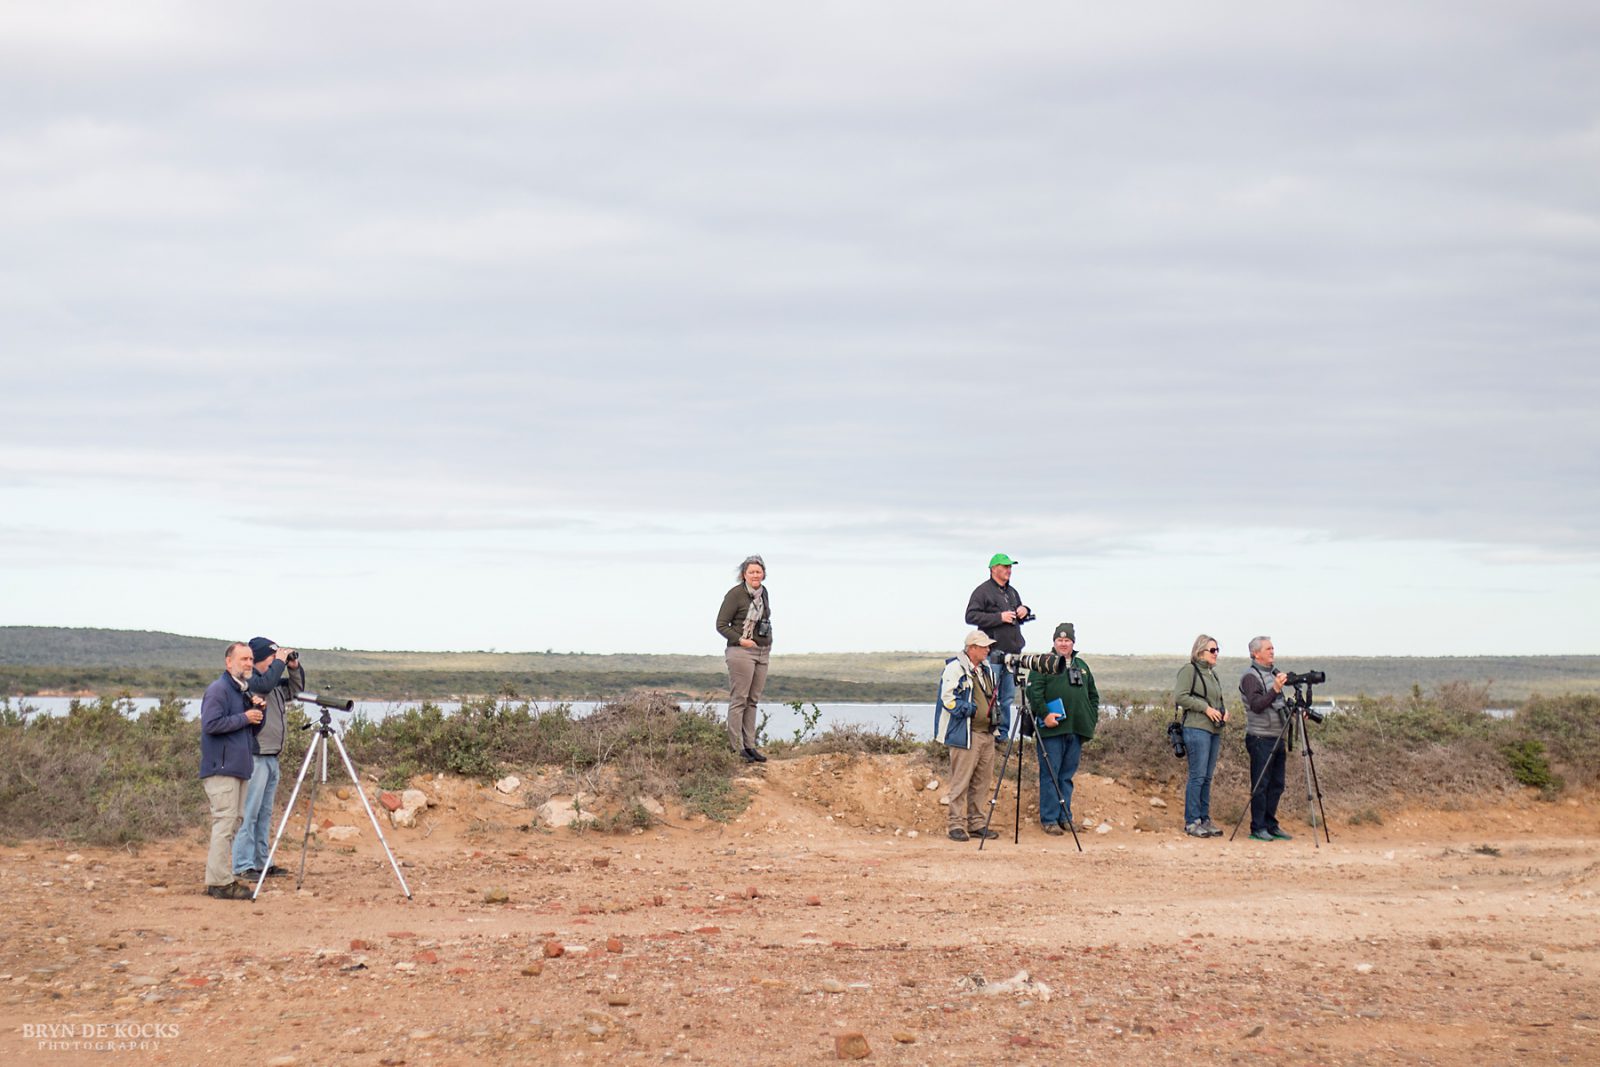 Group of birders later in the morning, watching the Warbler.